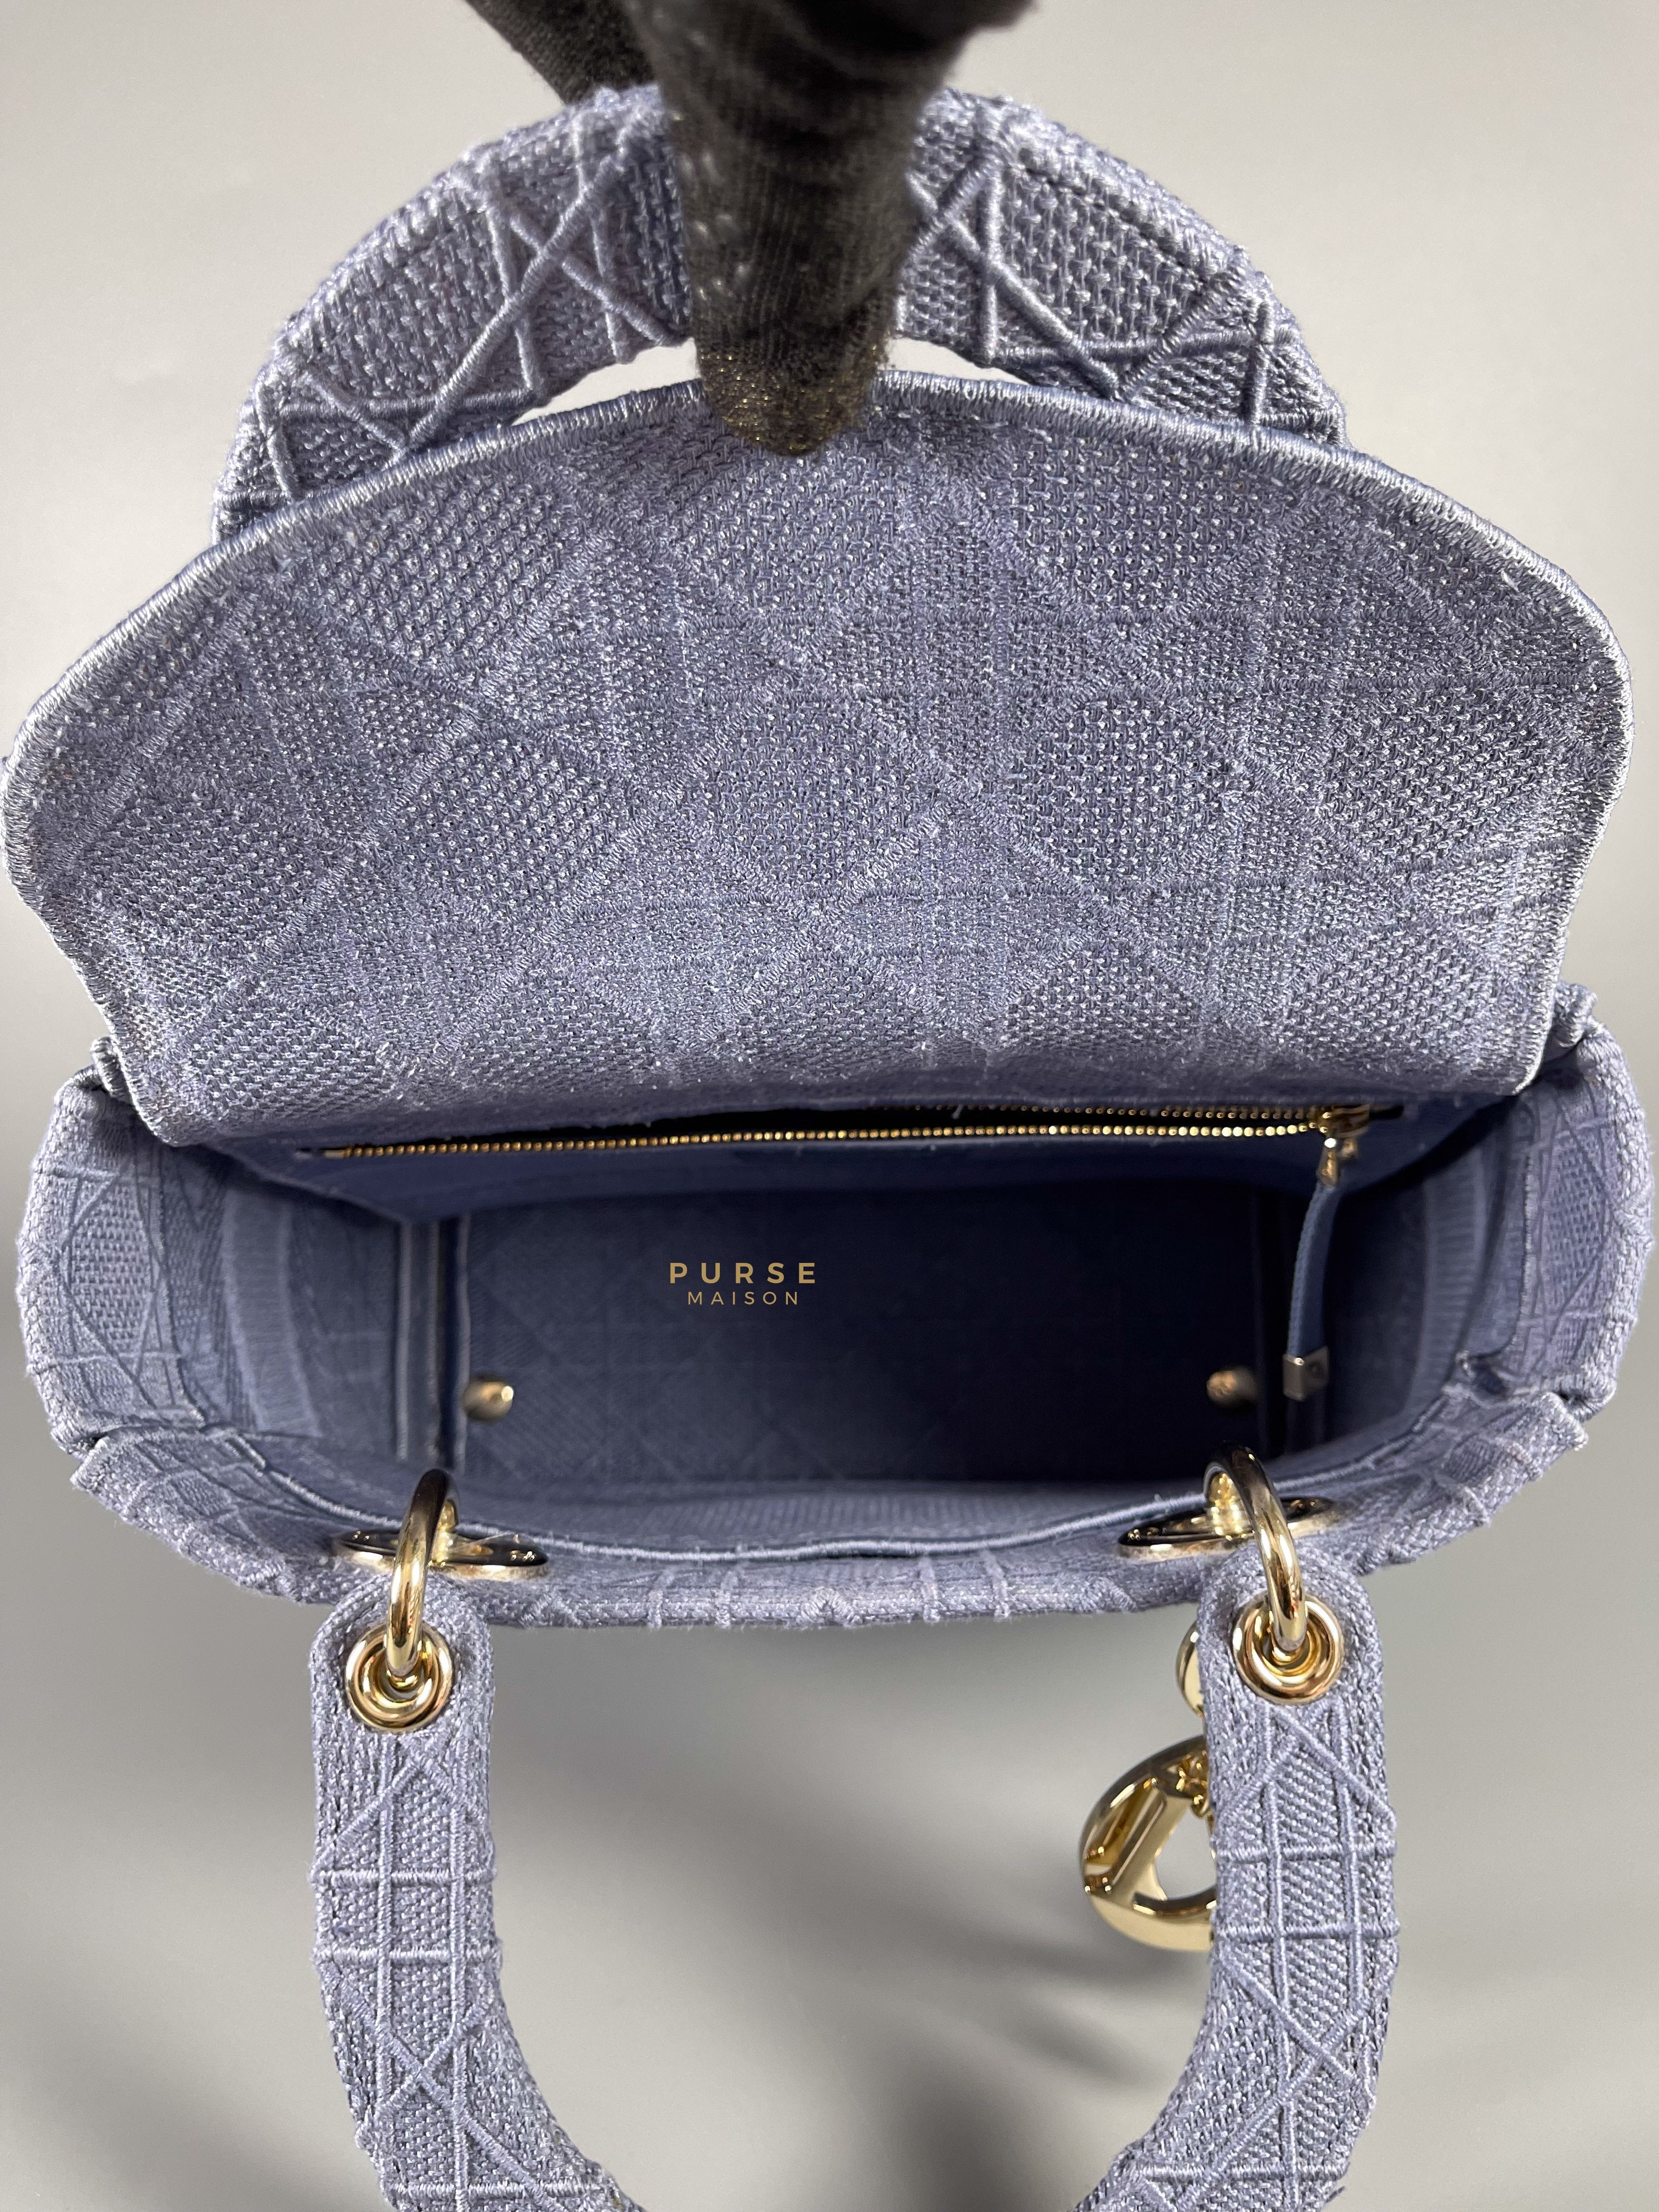 Christian Dior Lady D-Lite Blue Medium in Canvas Embroidered Cannage and Light Gold Hardware | Purse Maison Luxury Bags Shop